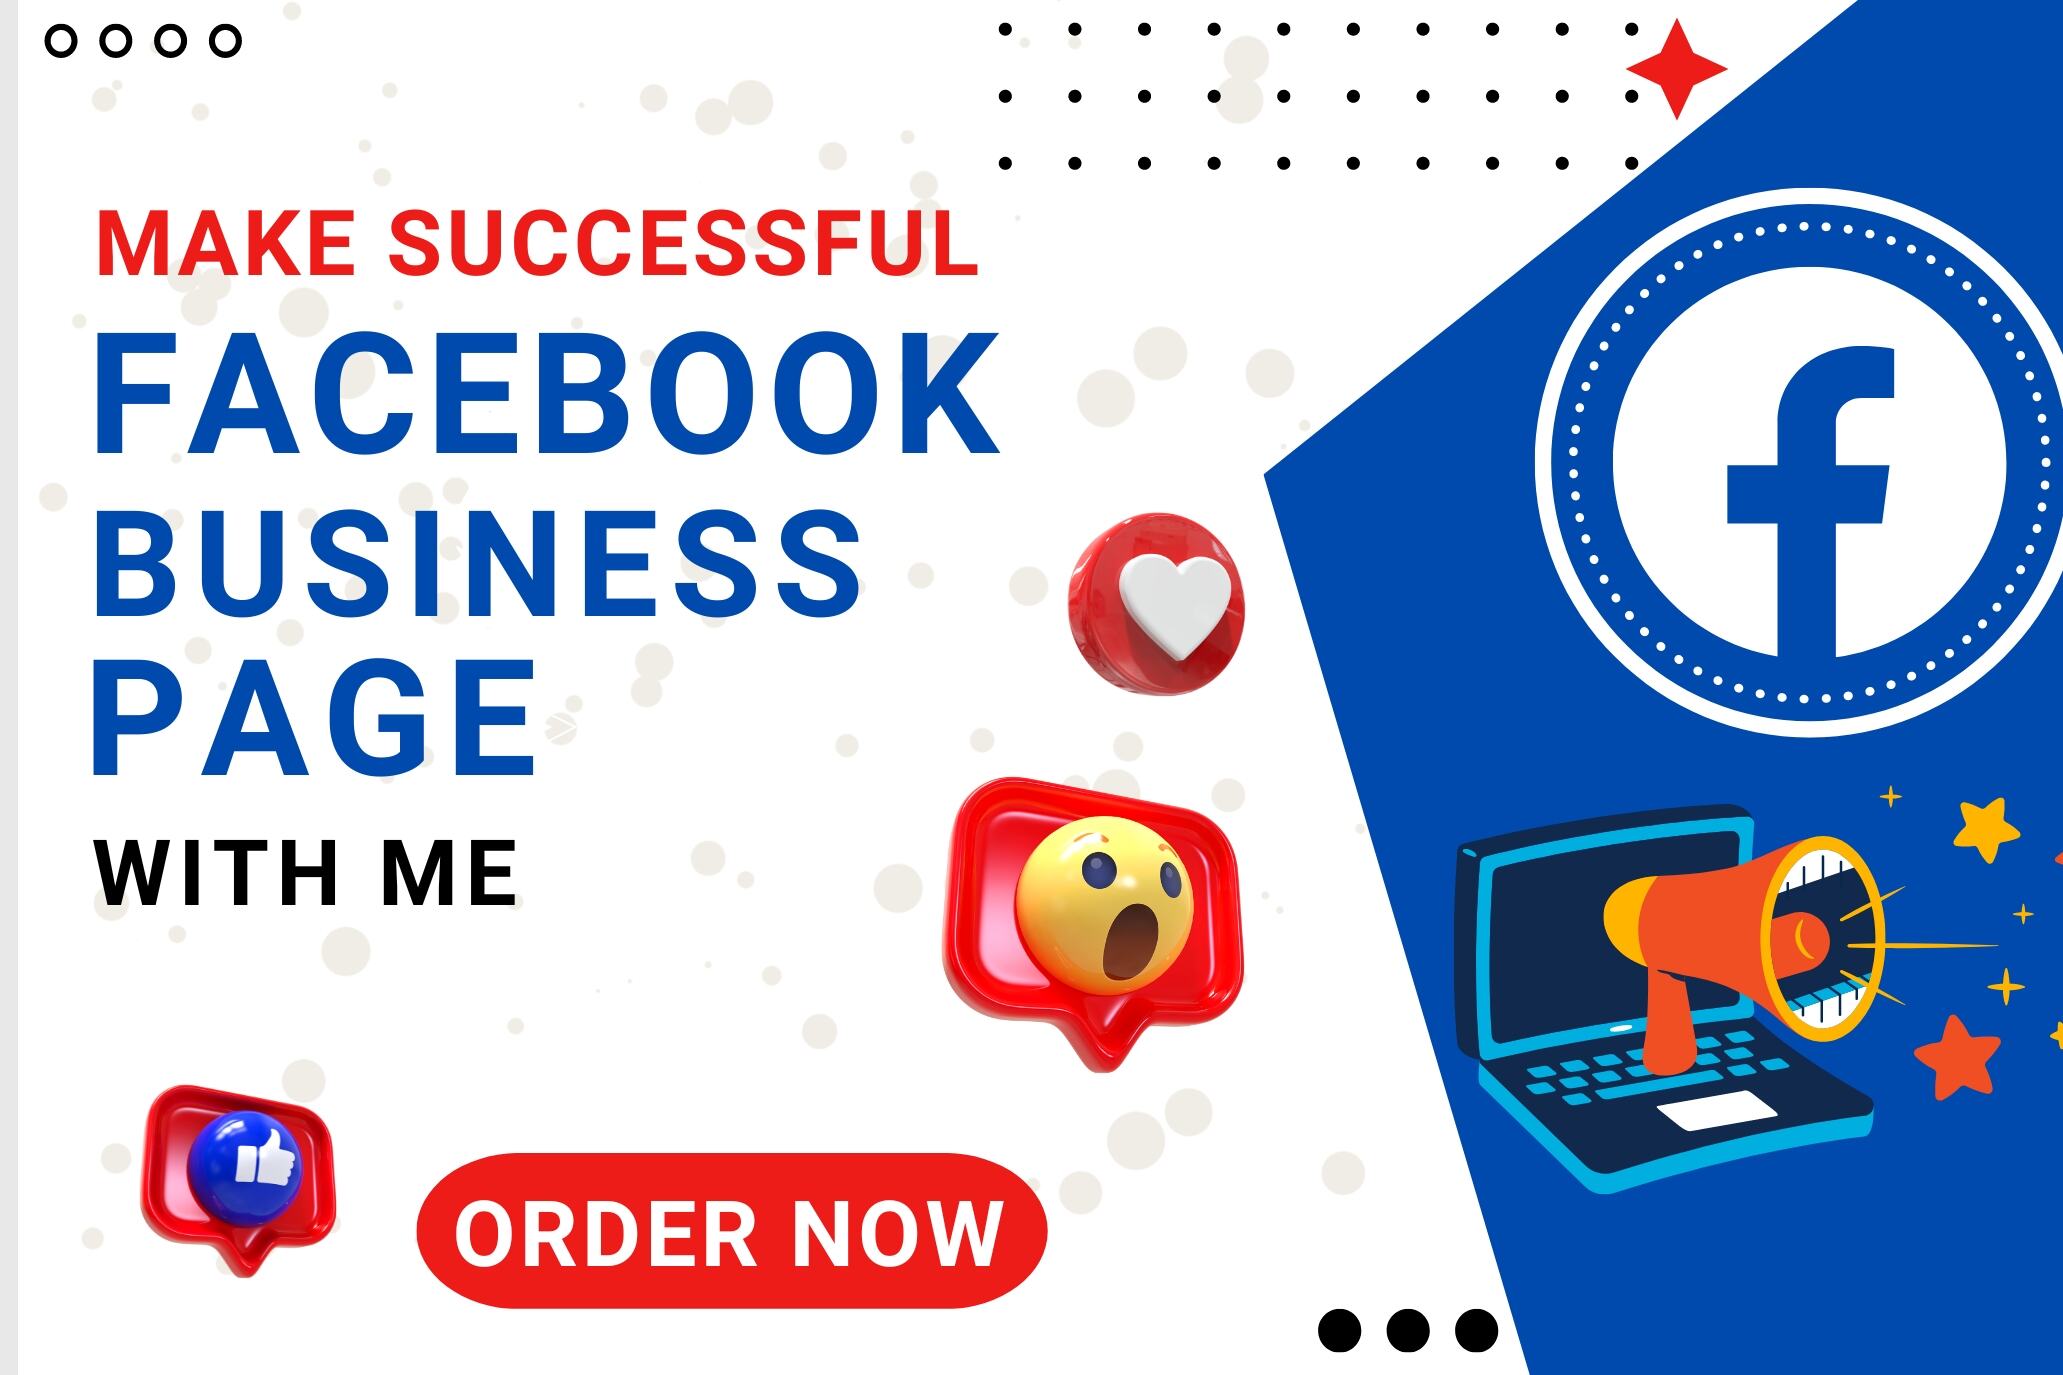 I will create, set up and design professional Facebook business page